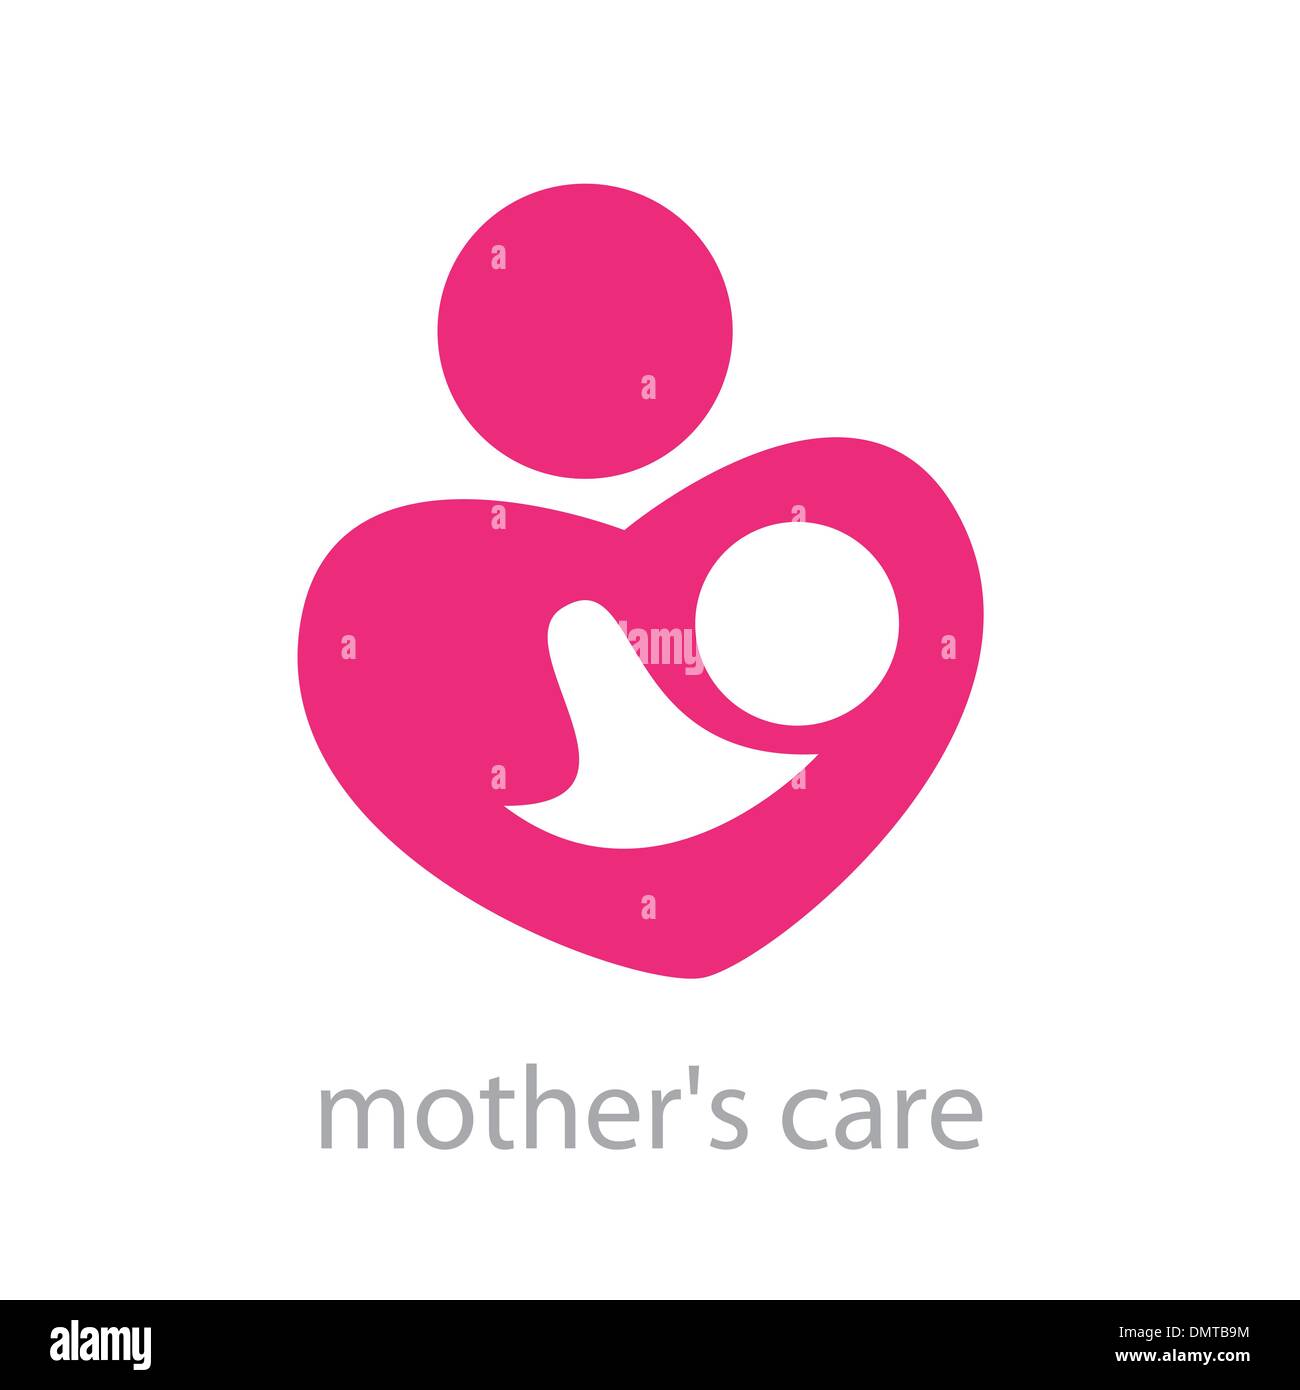 mother's-care Stock Vector